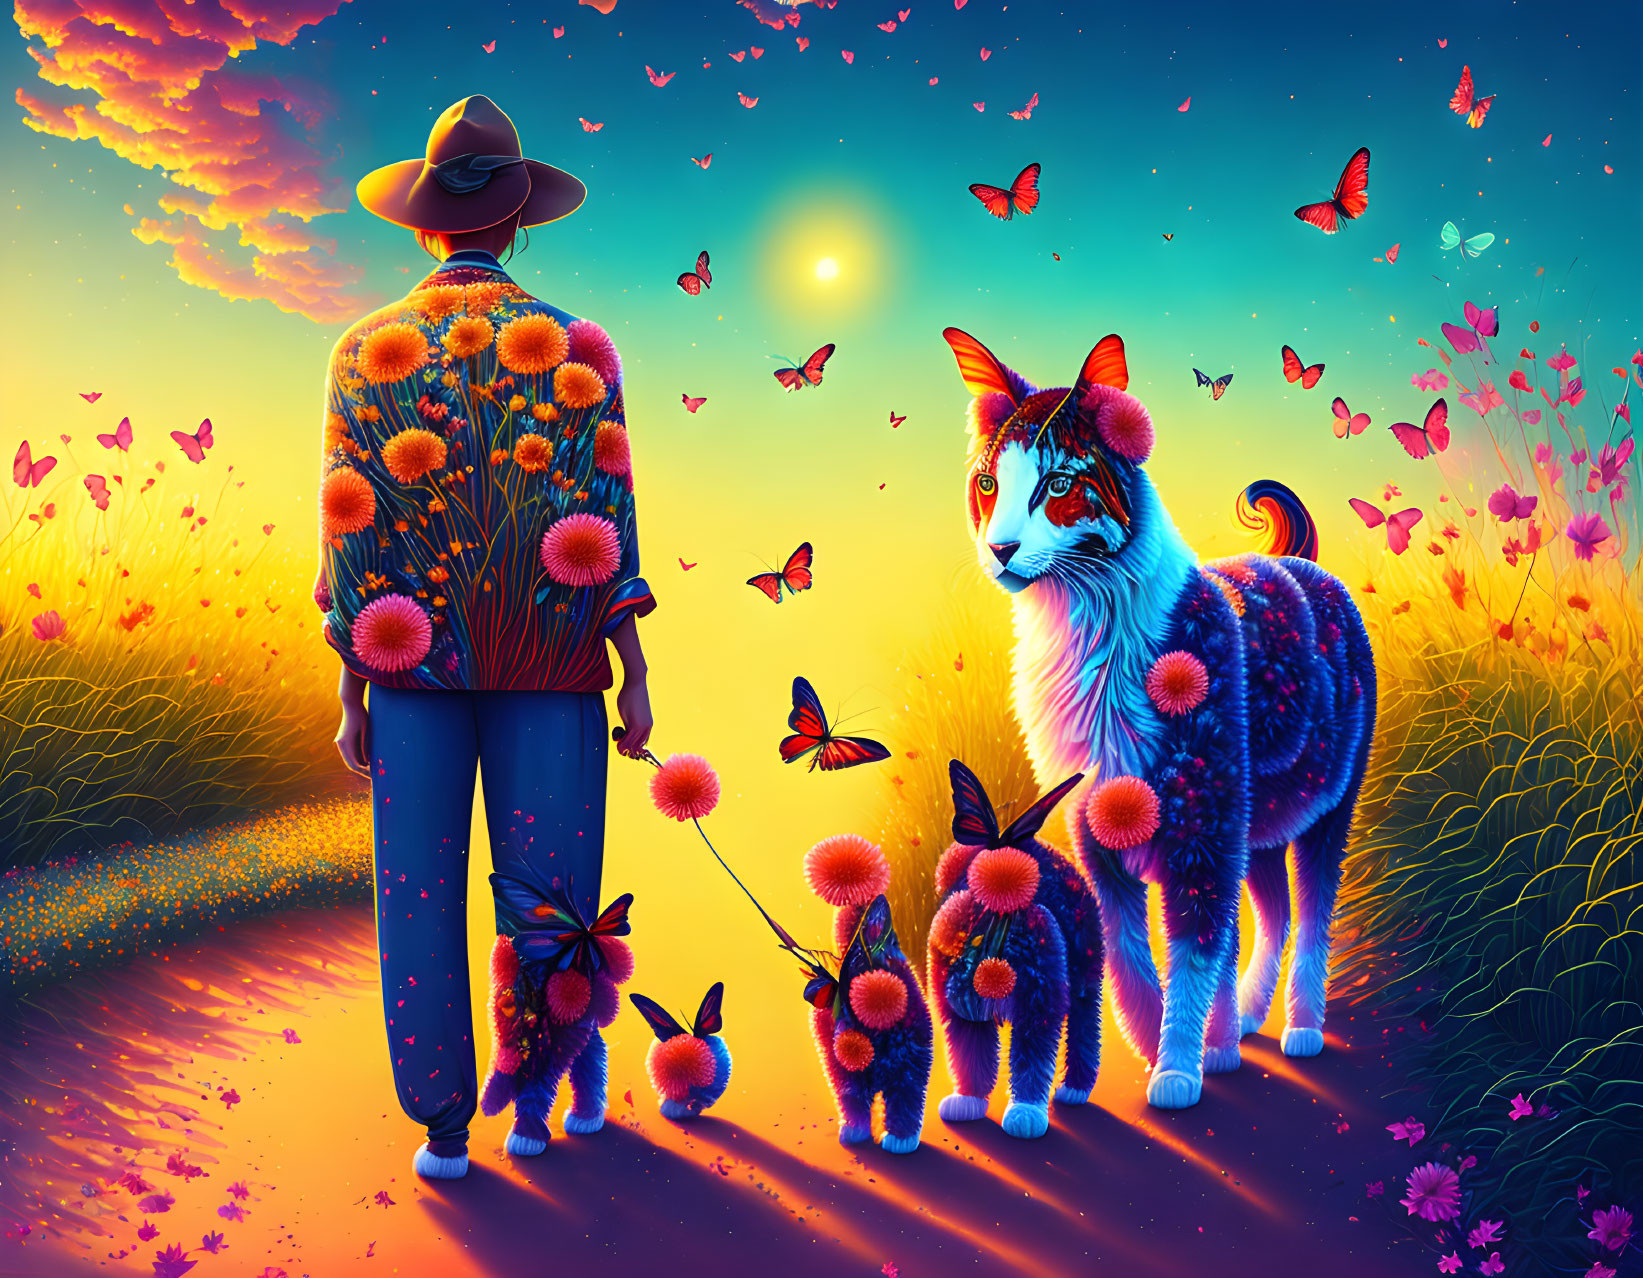 Colorful illustration: person, animals, and flowers in vibrant field under sunset sky